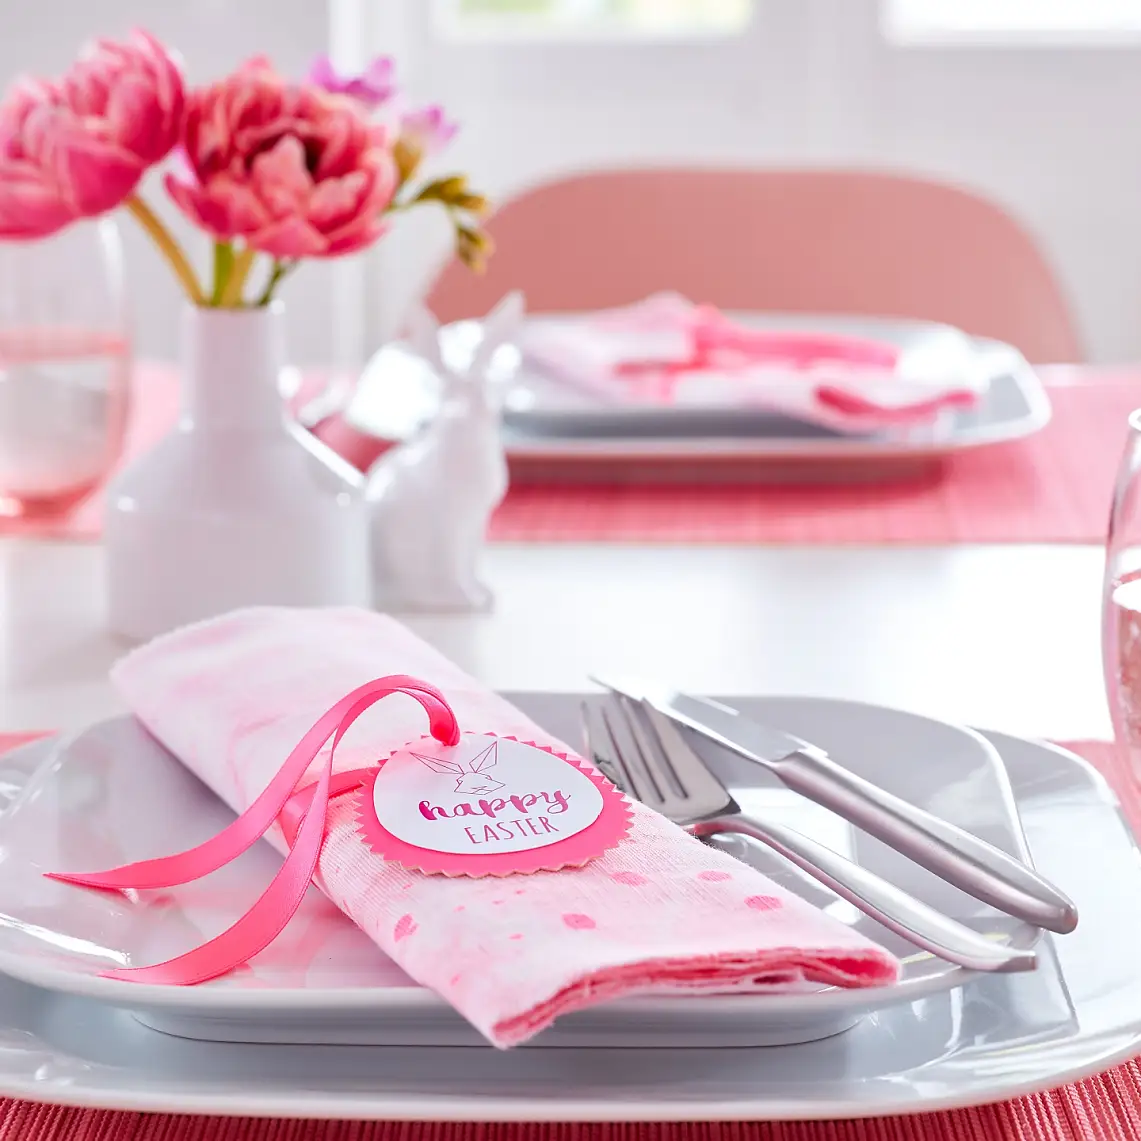 Pink is the main color on this Easter table. The bunny napkin folds each wear a matching DIY napkin ring with a bunny portrait and good wishes for the spring holidays.